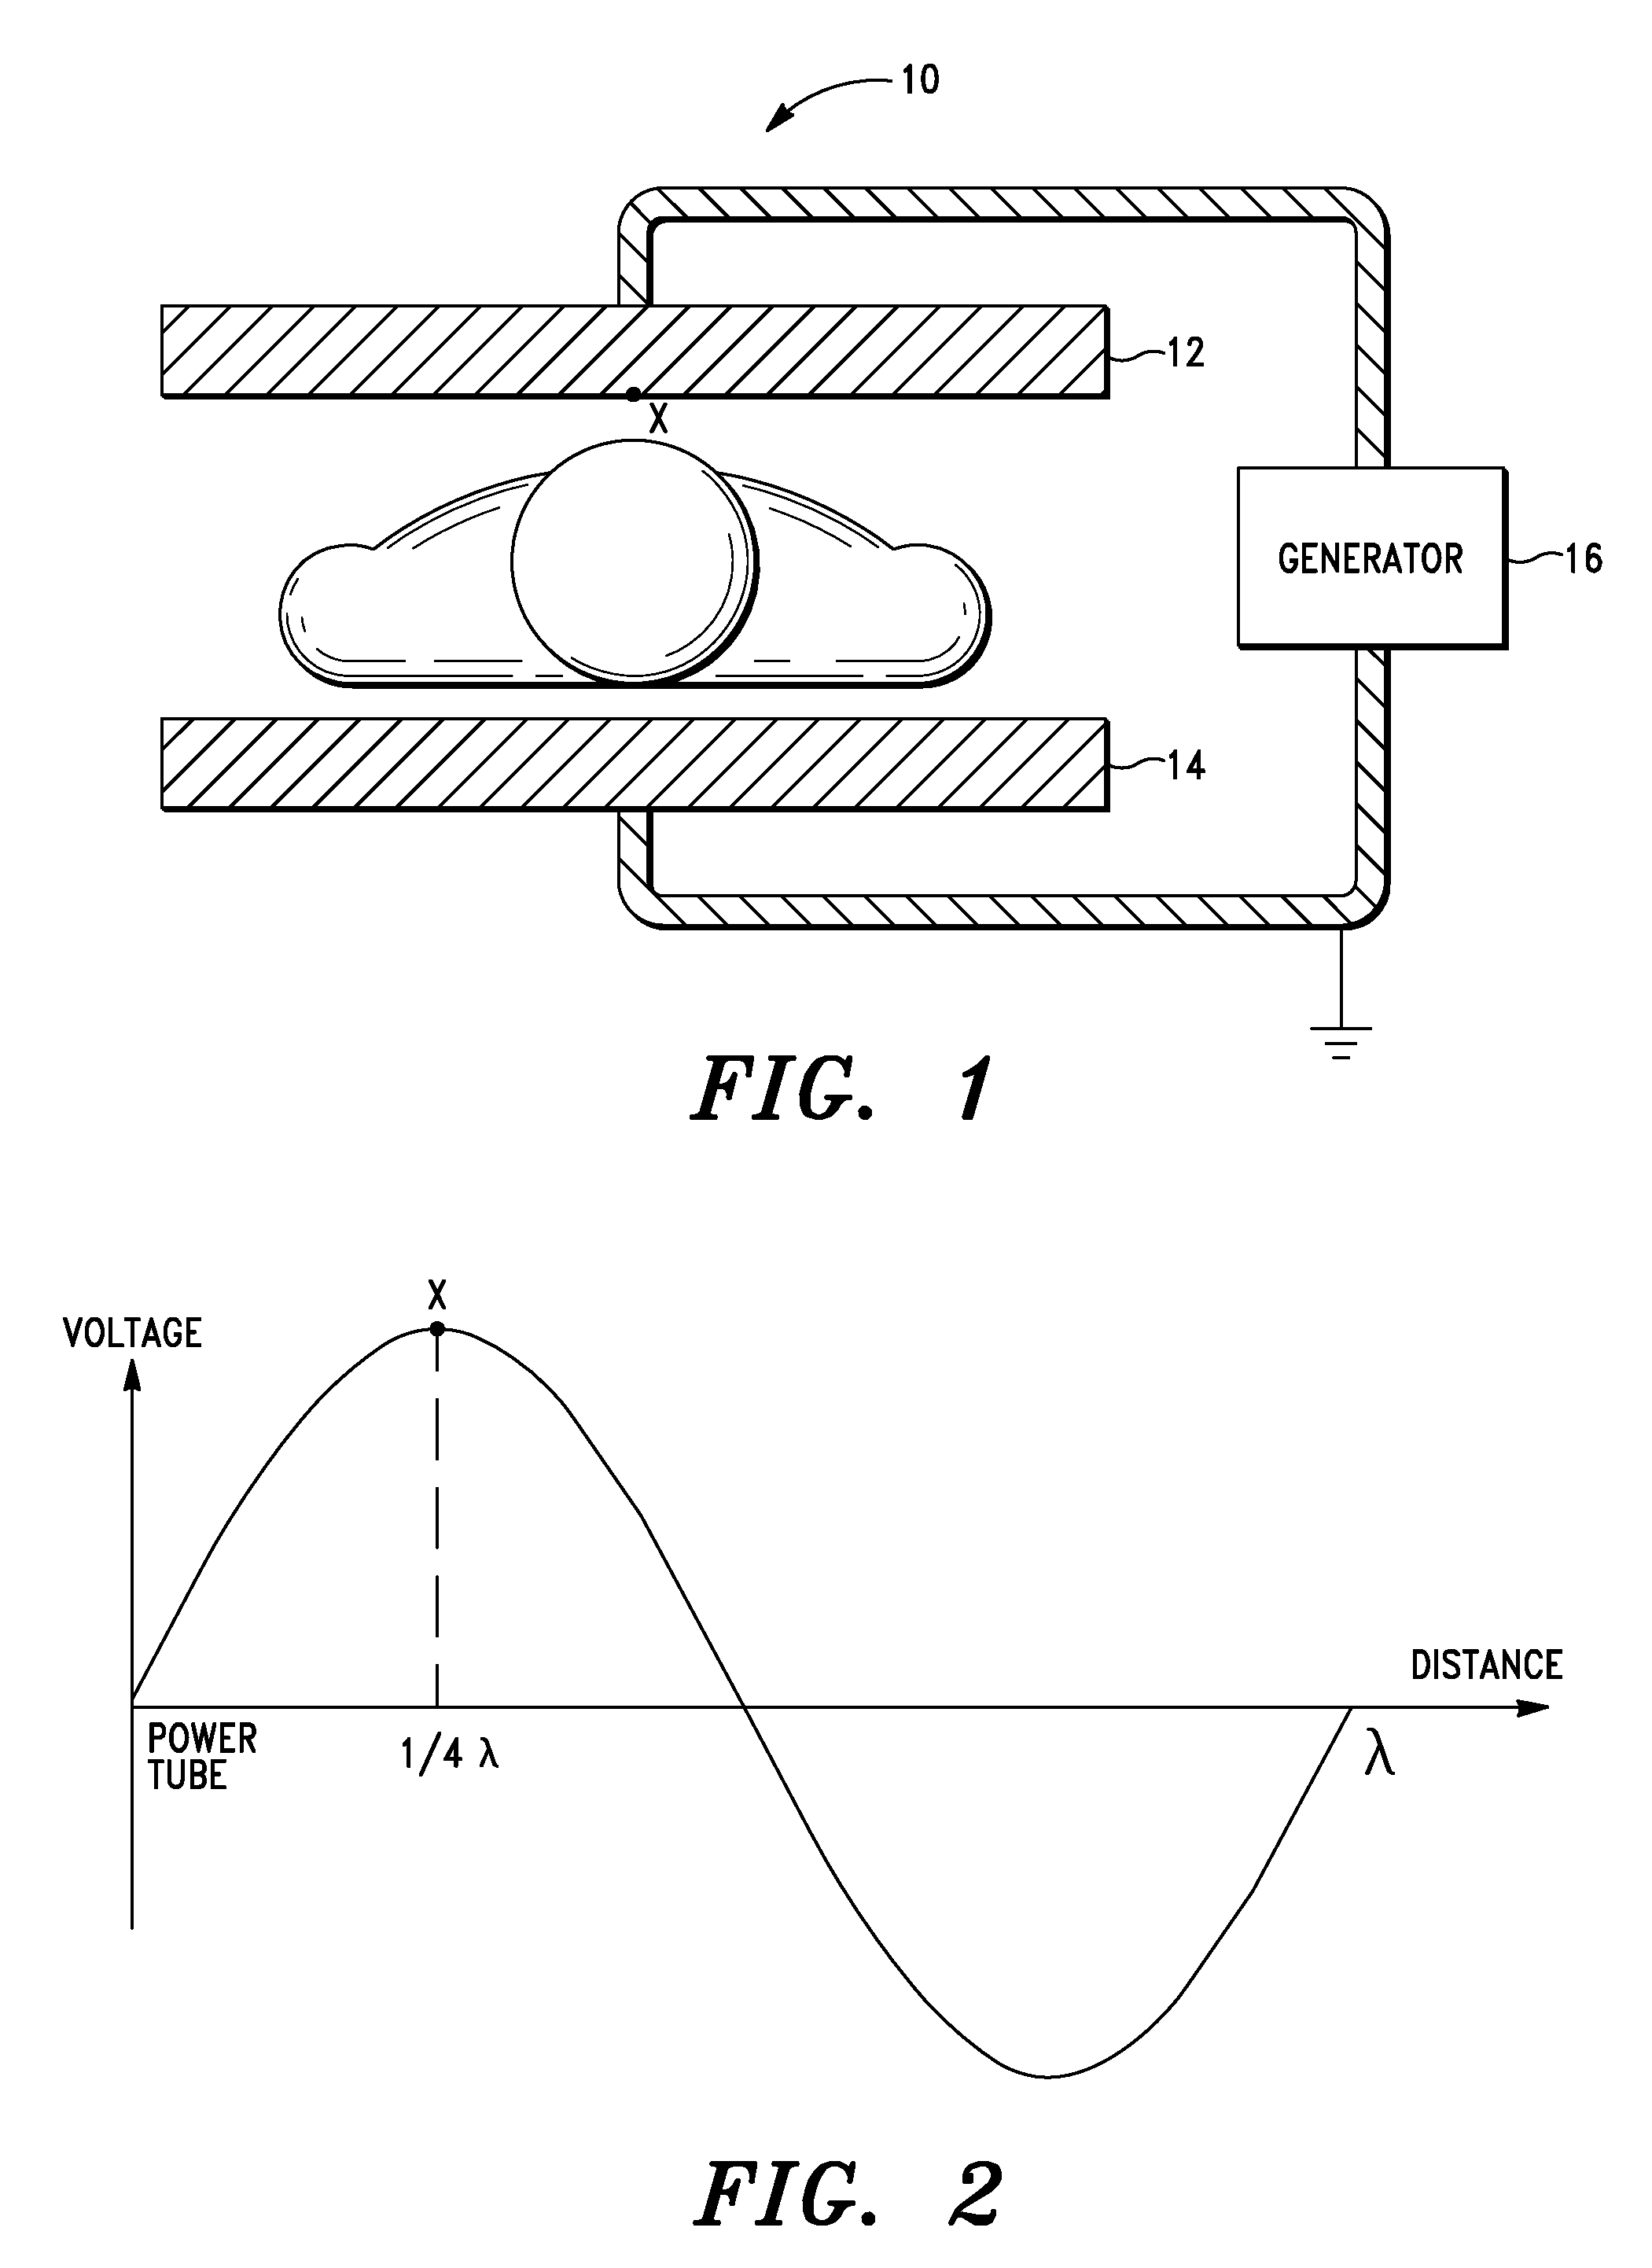 Apparatus and Method for Heating Biological Targets